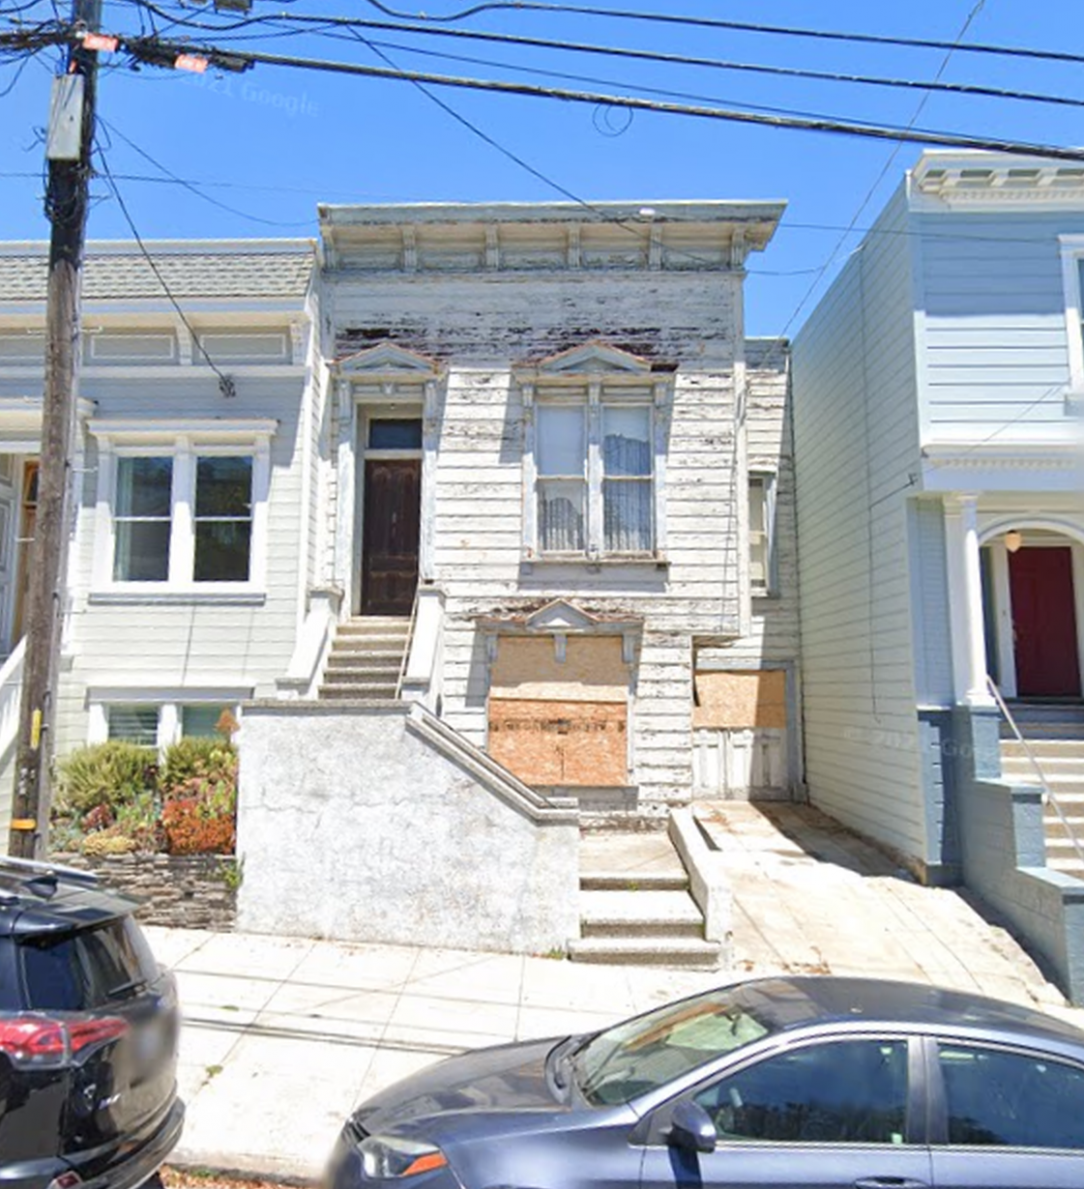 This house with 2 bathrooms and no useable bedrooms on a 2158sf lot just sold for $1. 97M in SF